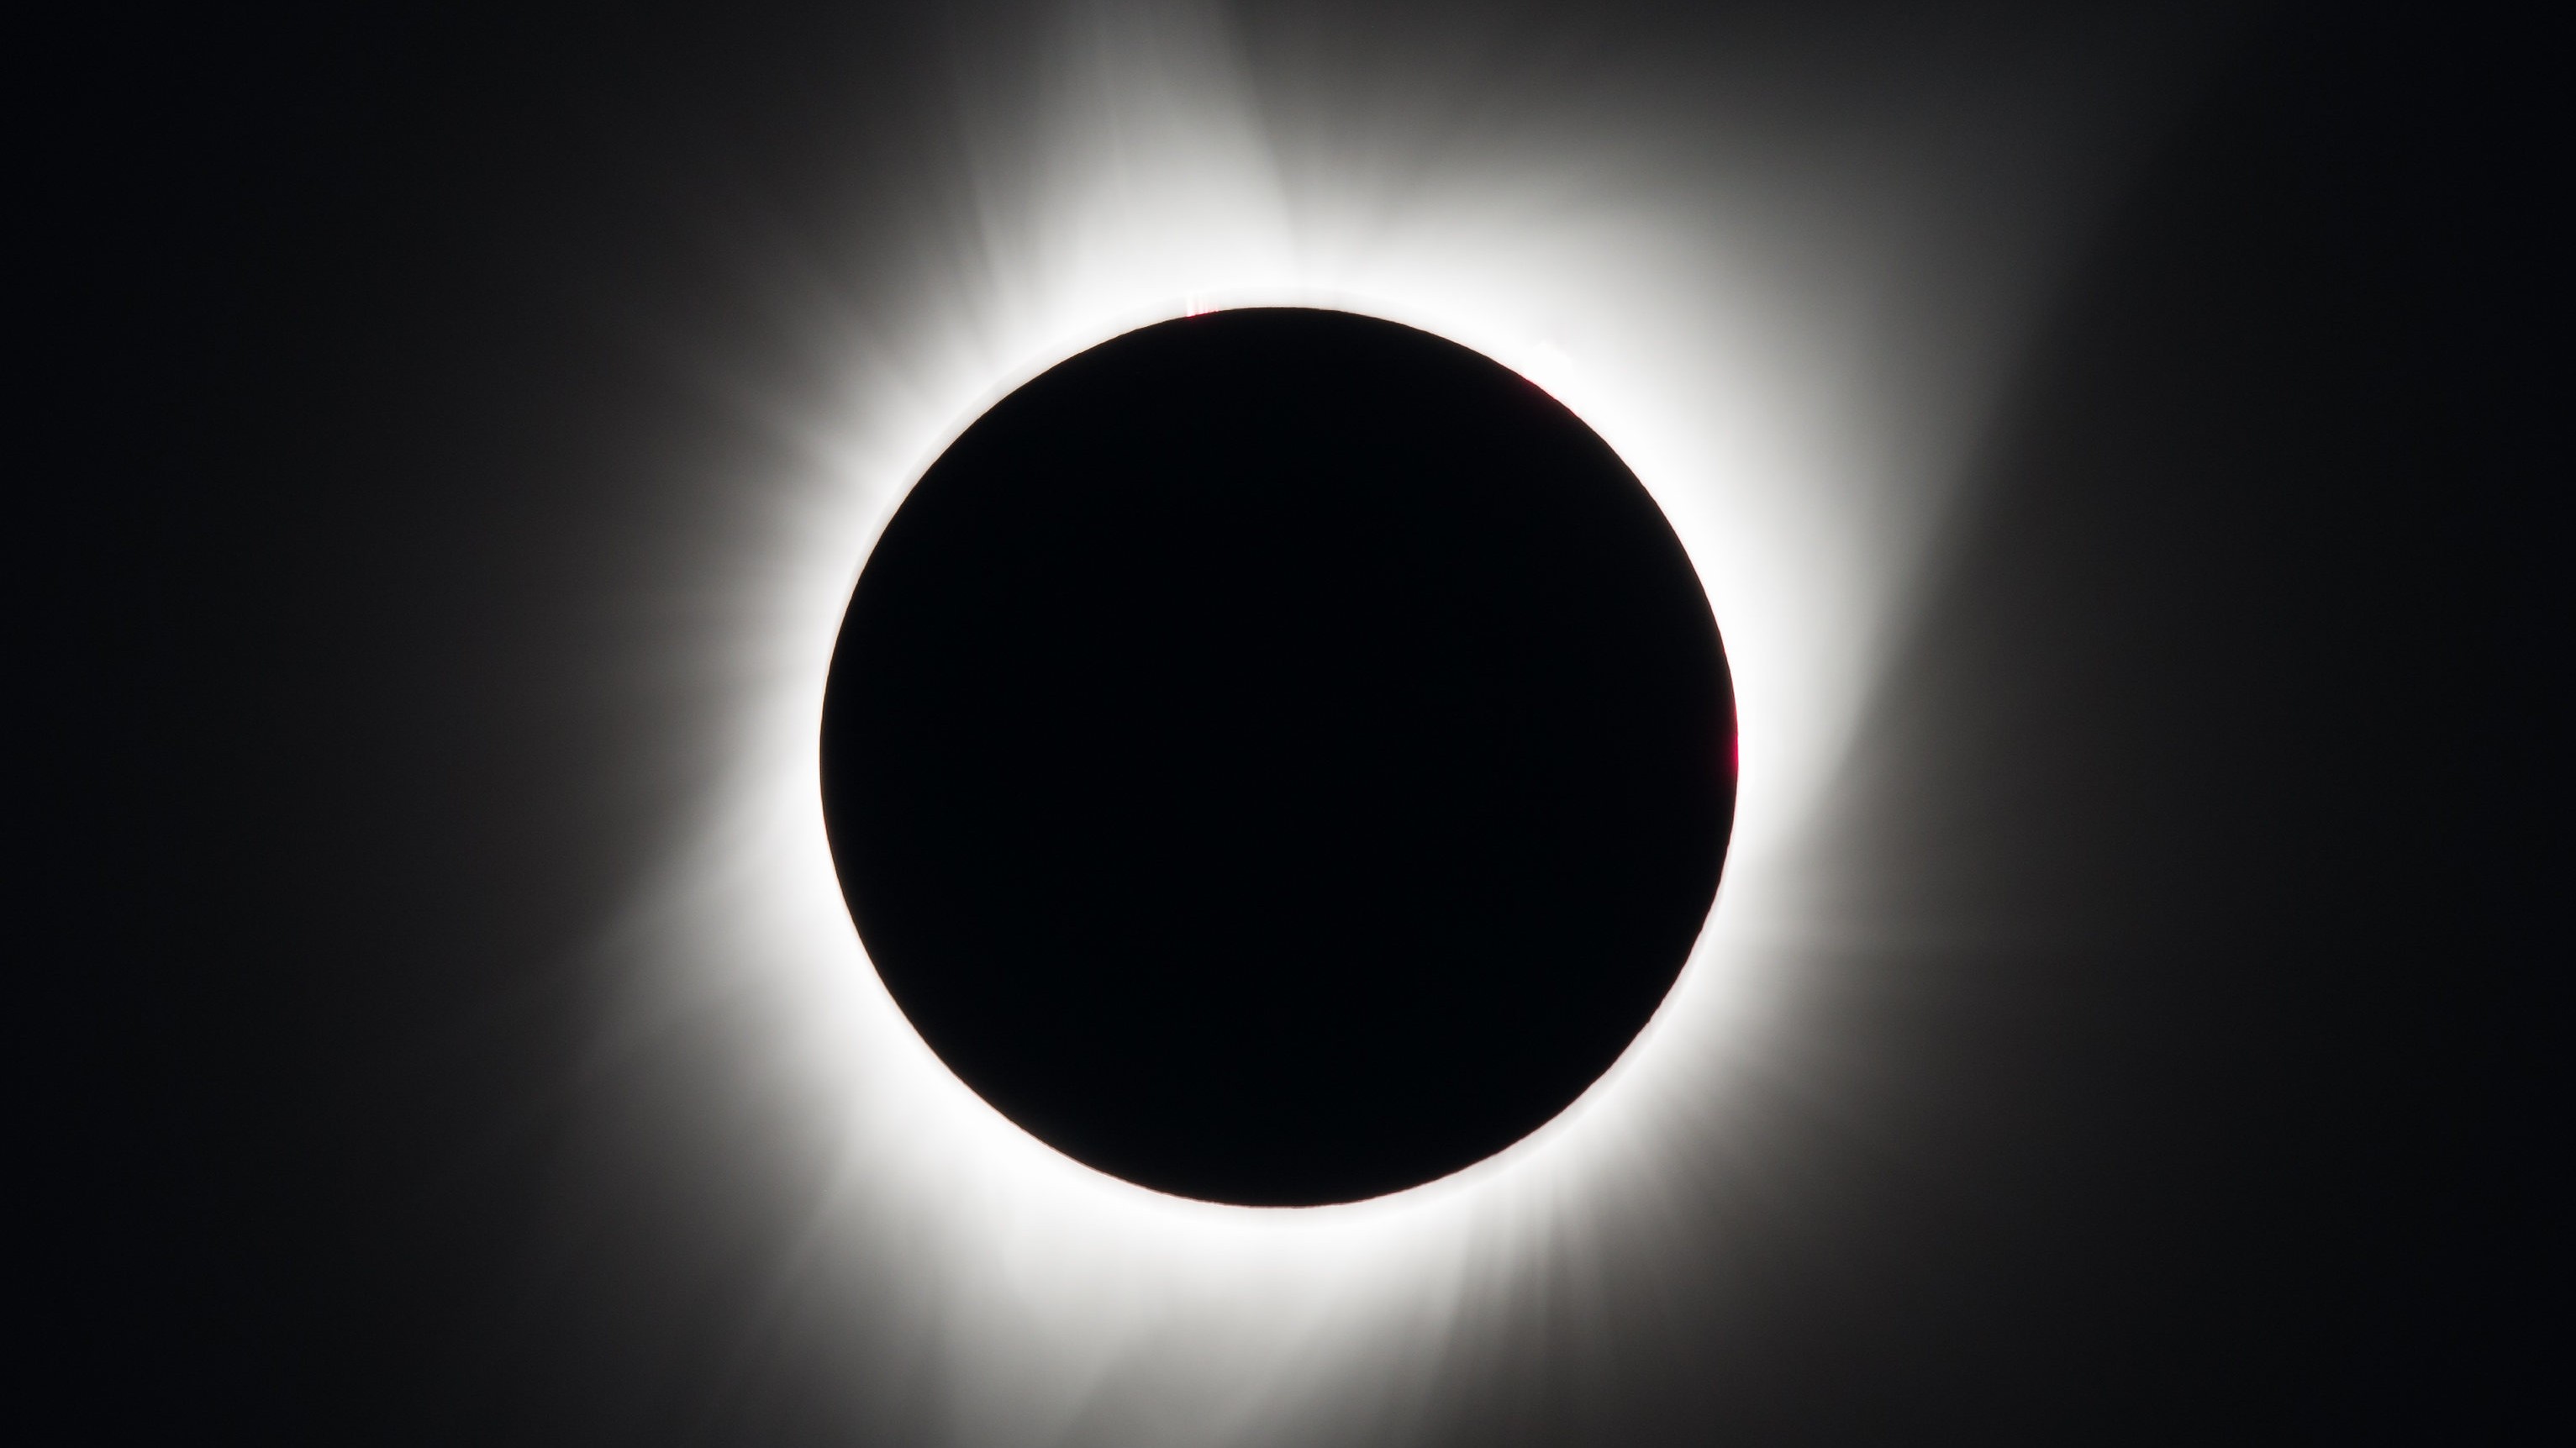 A chronology of the April 8 total solar eclipse Space